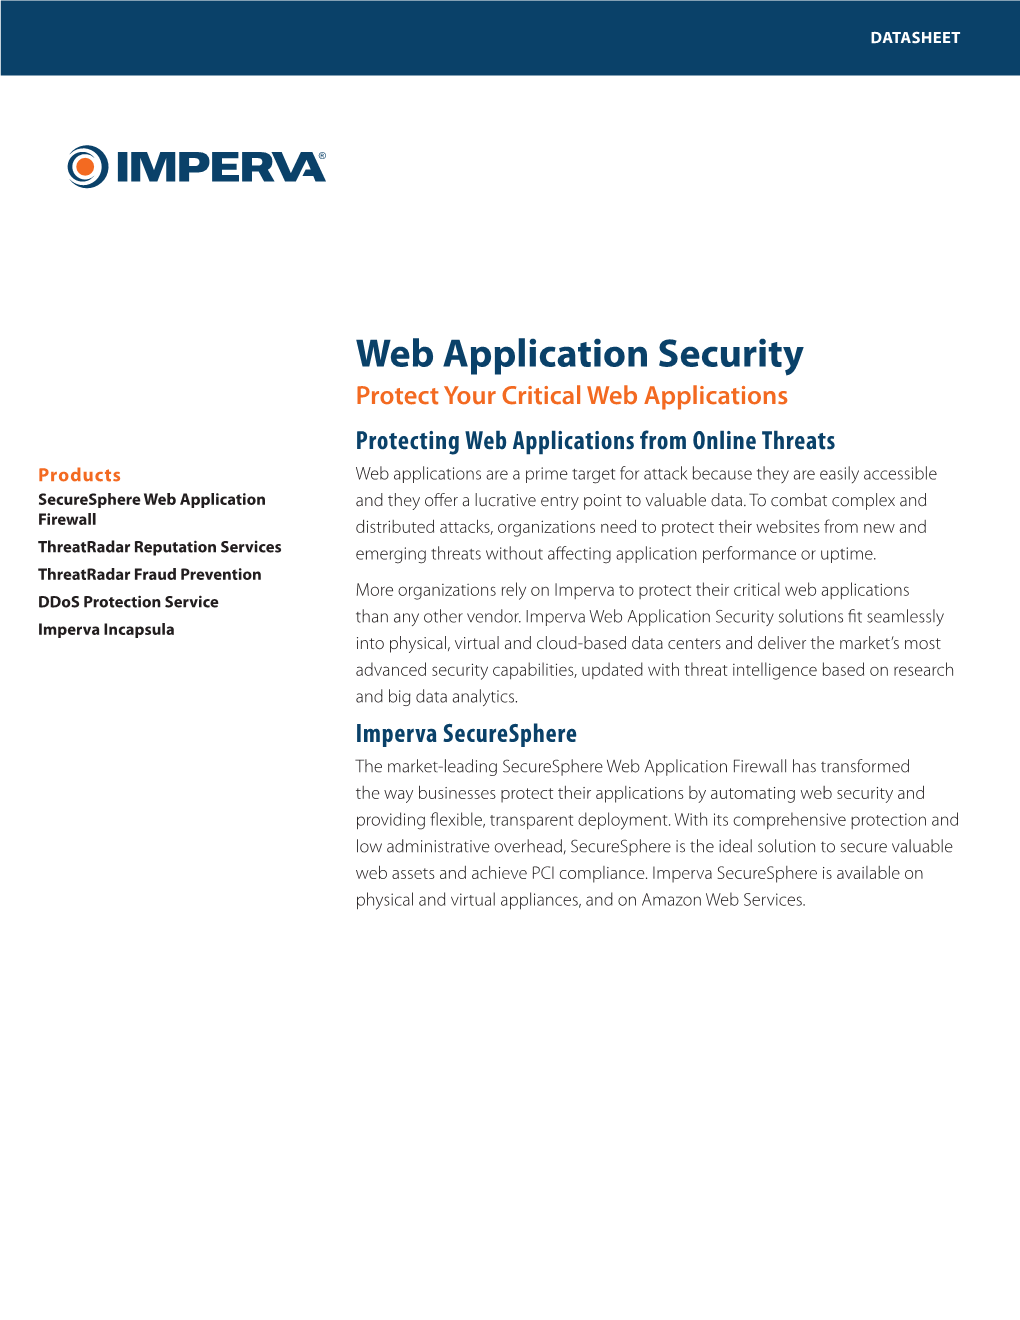 Imperva Securesphere Web Application Security Products